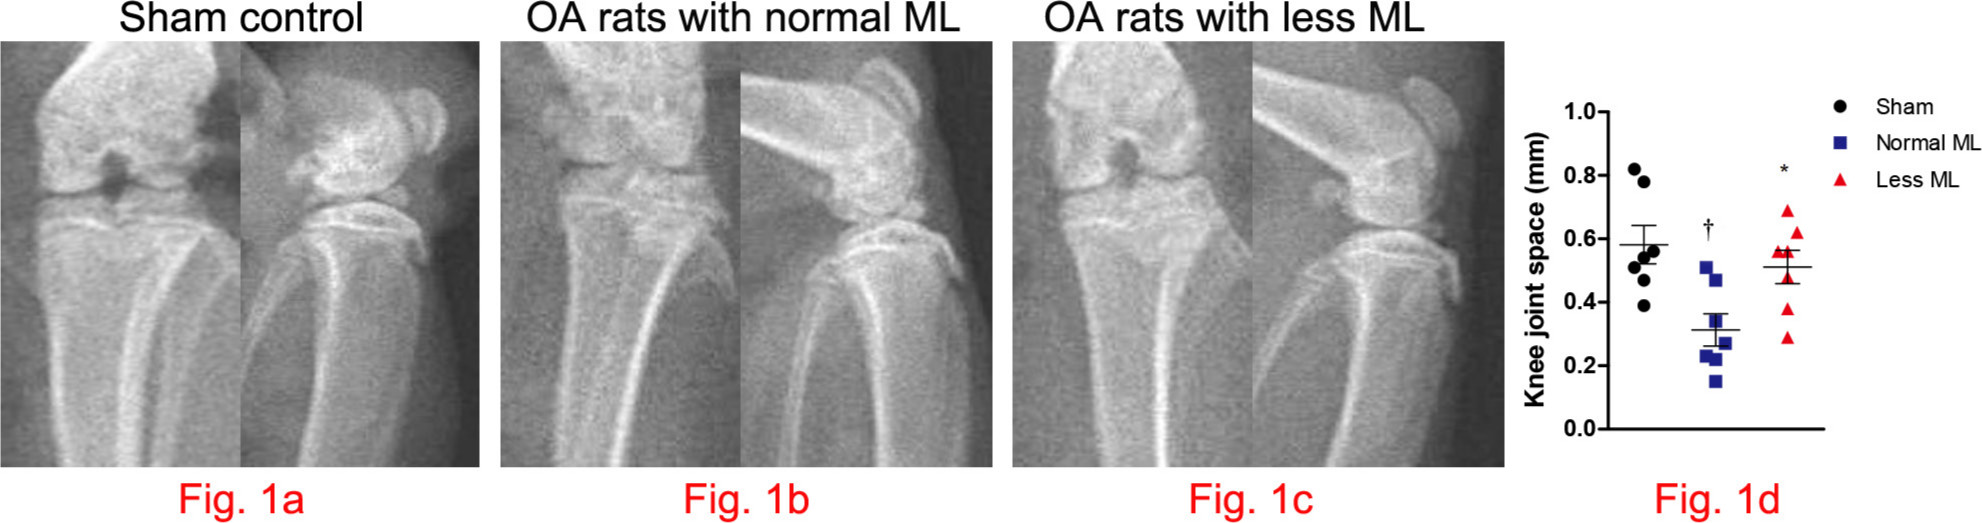 Fig. 1 
            Less mechanical loading (ML) strategy enlarging the knee joint space in an osteoarthritis (OA) rat. a) The frontal and lateral radiographs of knee joint in sham control. As compared with the narrowed and indistinct joint space in OA rats with normal ML (arrow, b), the joint space was enlarged in OA rats with less ML (arrow, c). d) Furthermore, joint space, as measured in the frontal images, enlarged significantly in rats with less ML. One-way analysis of variance (ANOVA) was used, *p < 0.05 between OA rats with normal and less ML. †p < 0.01 between sham controls and OA rats with normal ML.
          